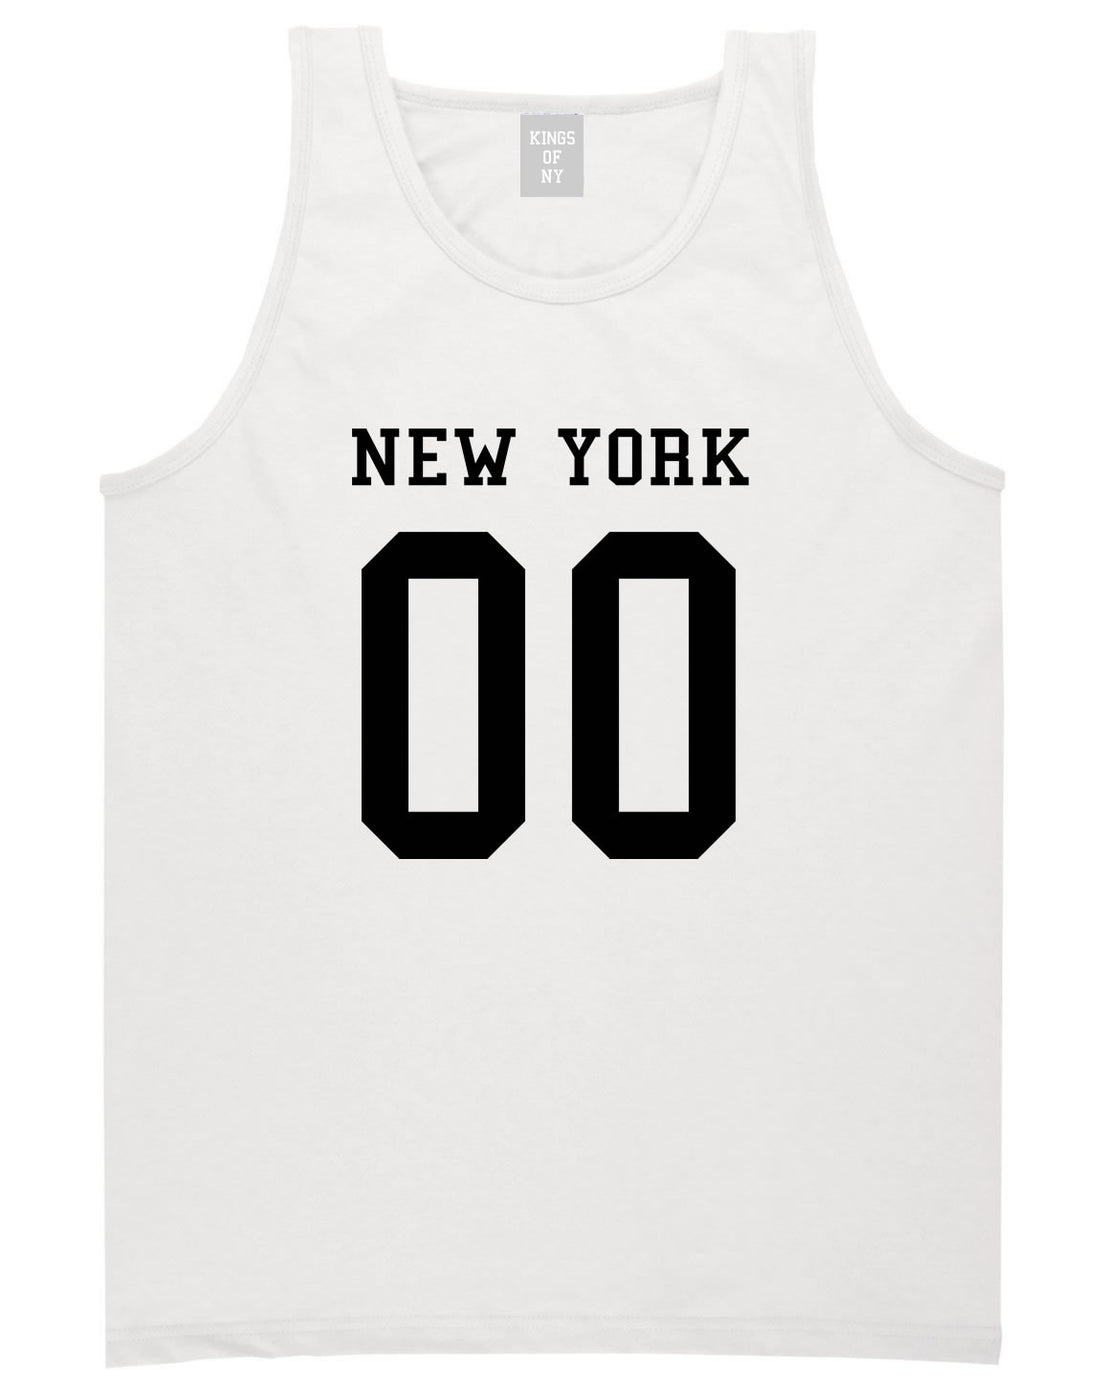 New York Team 00 Jersey Tank Top in White By Kings Of NY